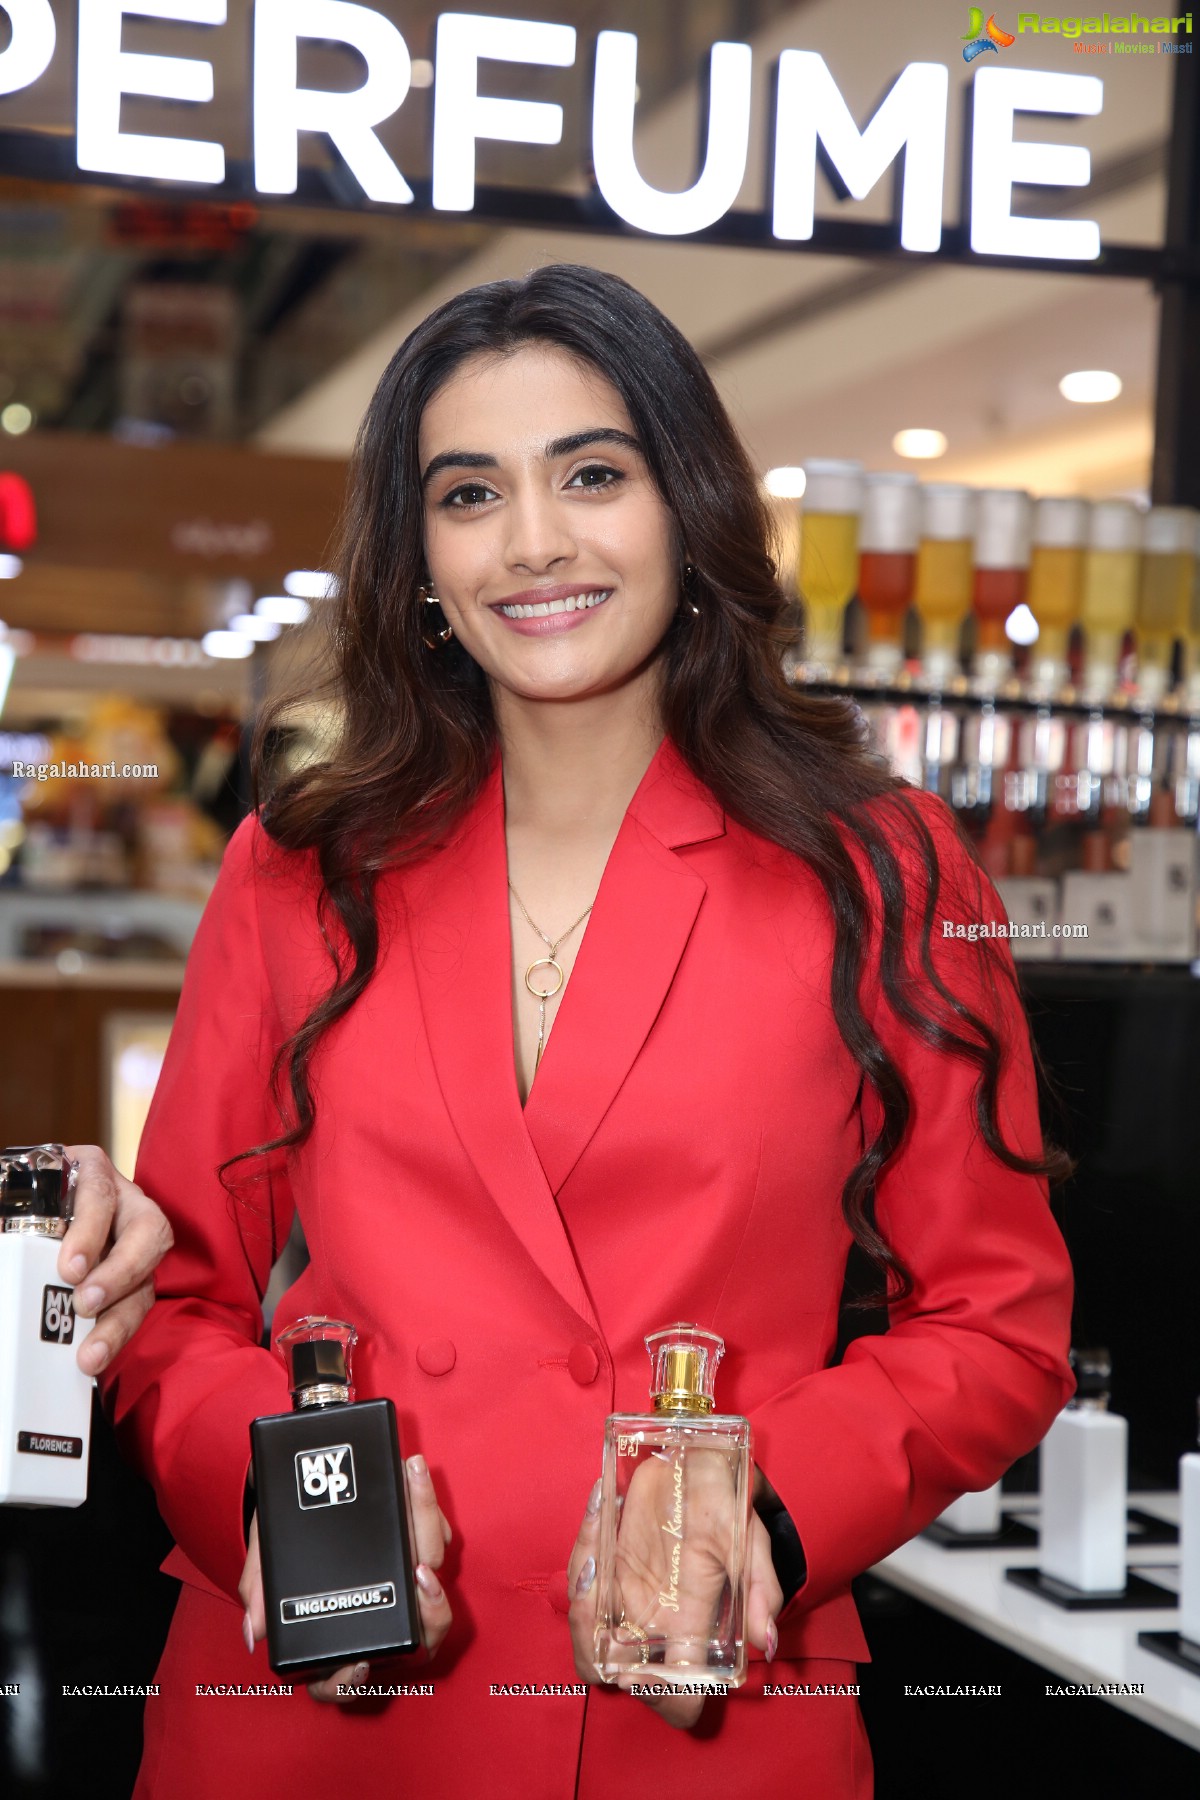 Make Your Own Perfume Opens It's New Store in Hyderabad at Inorbit Mall